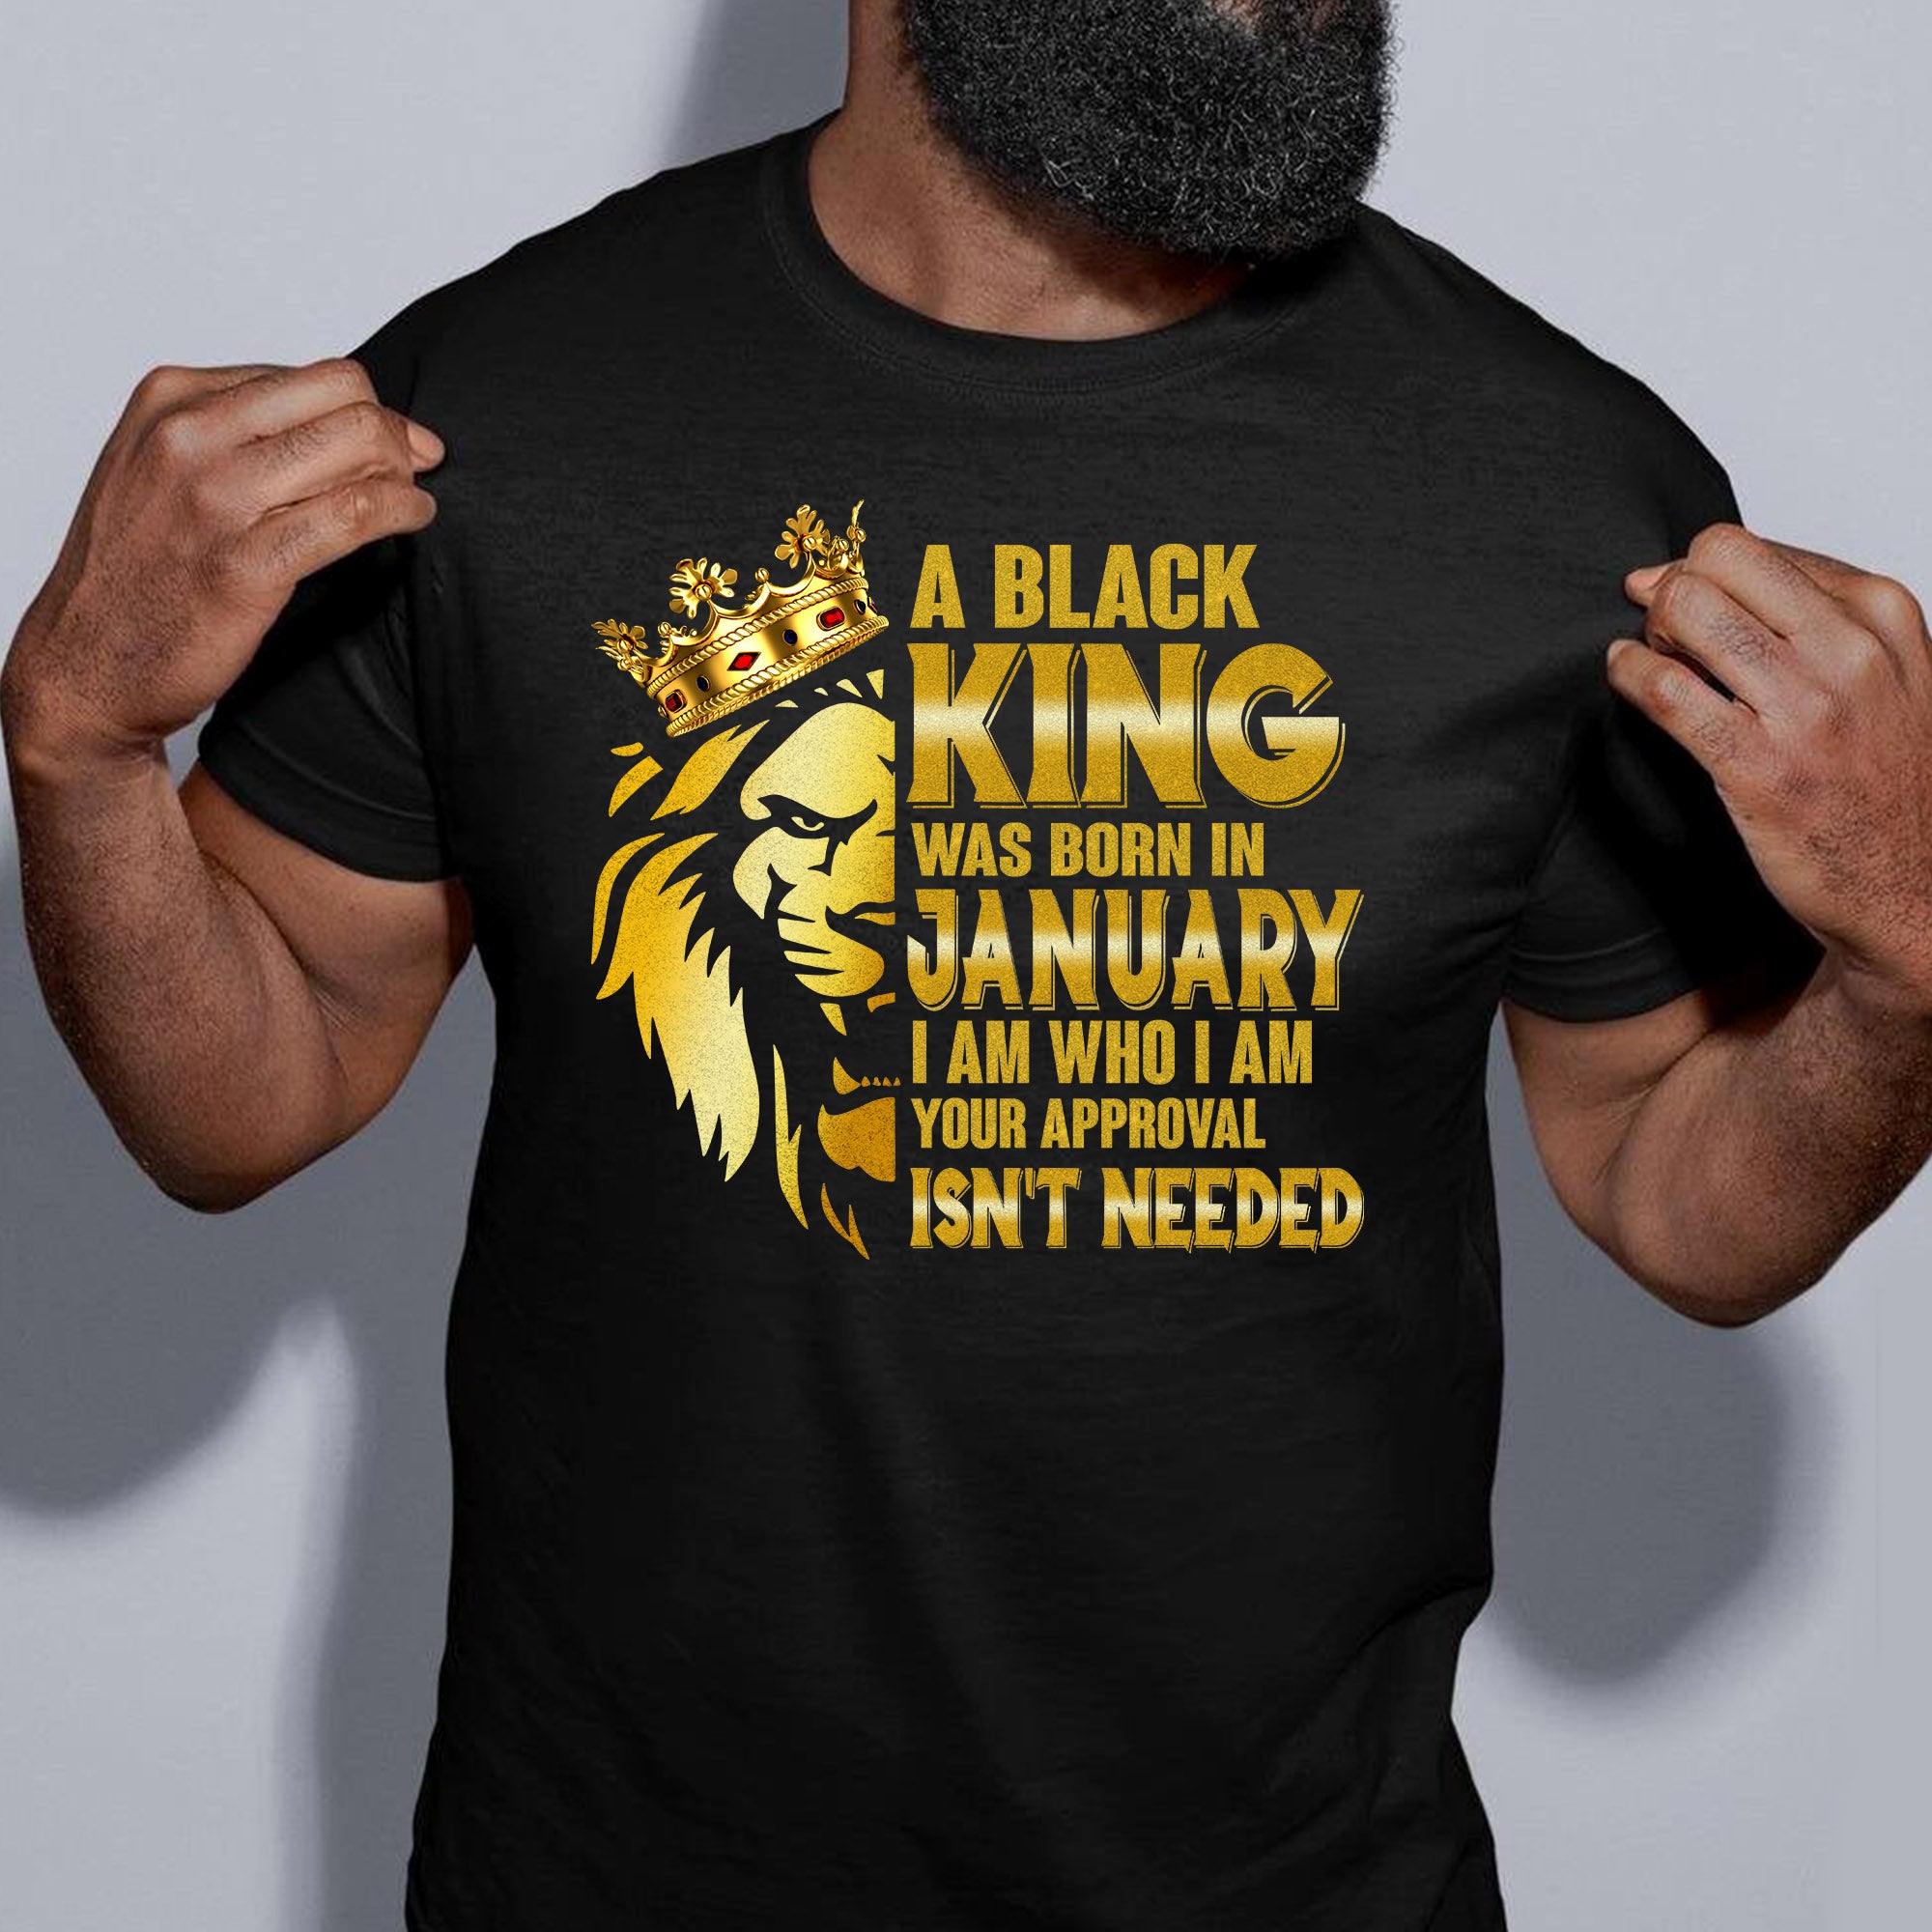 A Black King Was Born In January T-Shirt